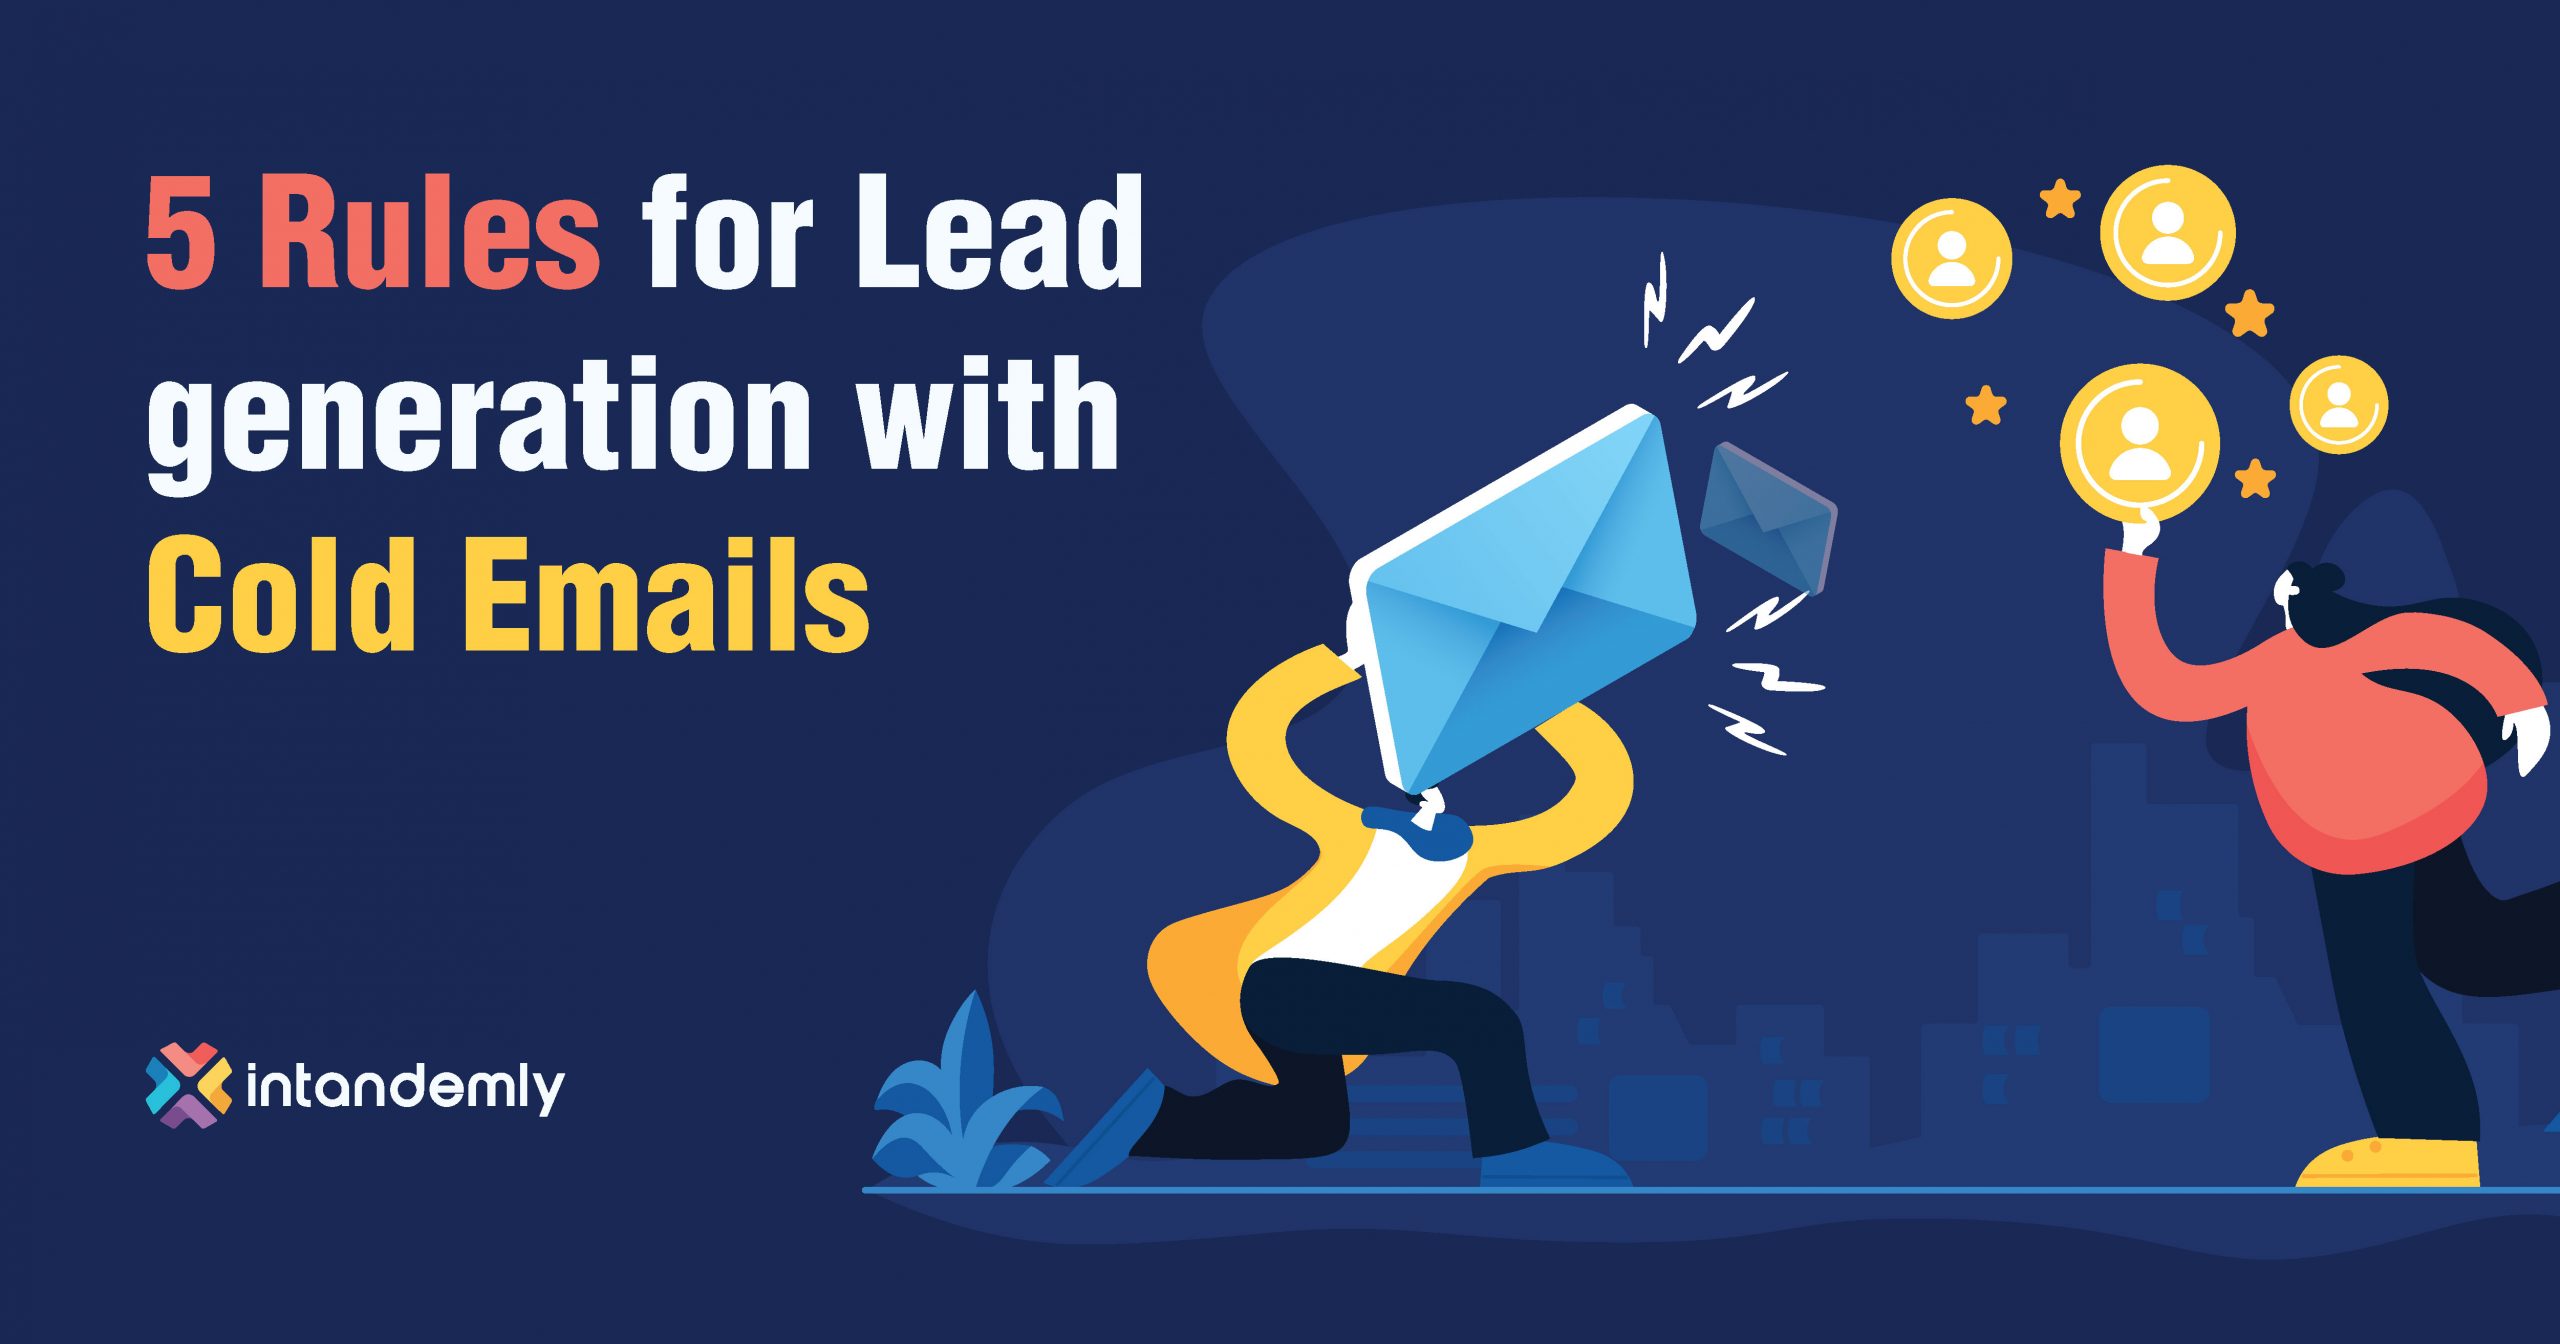 Lead generation with Cold Emails